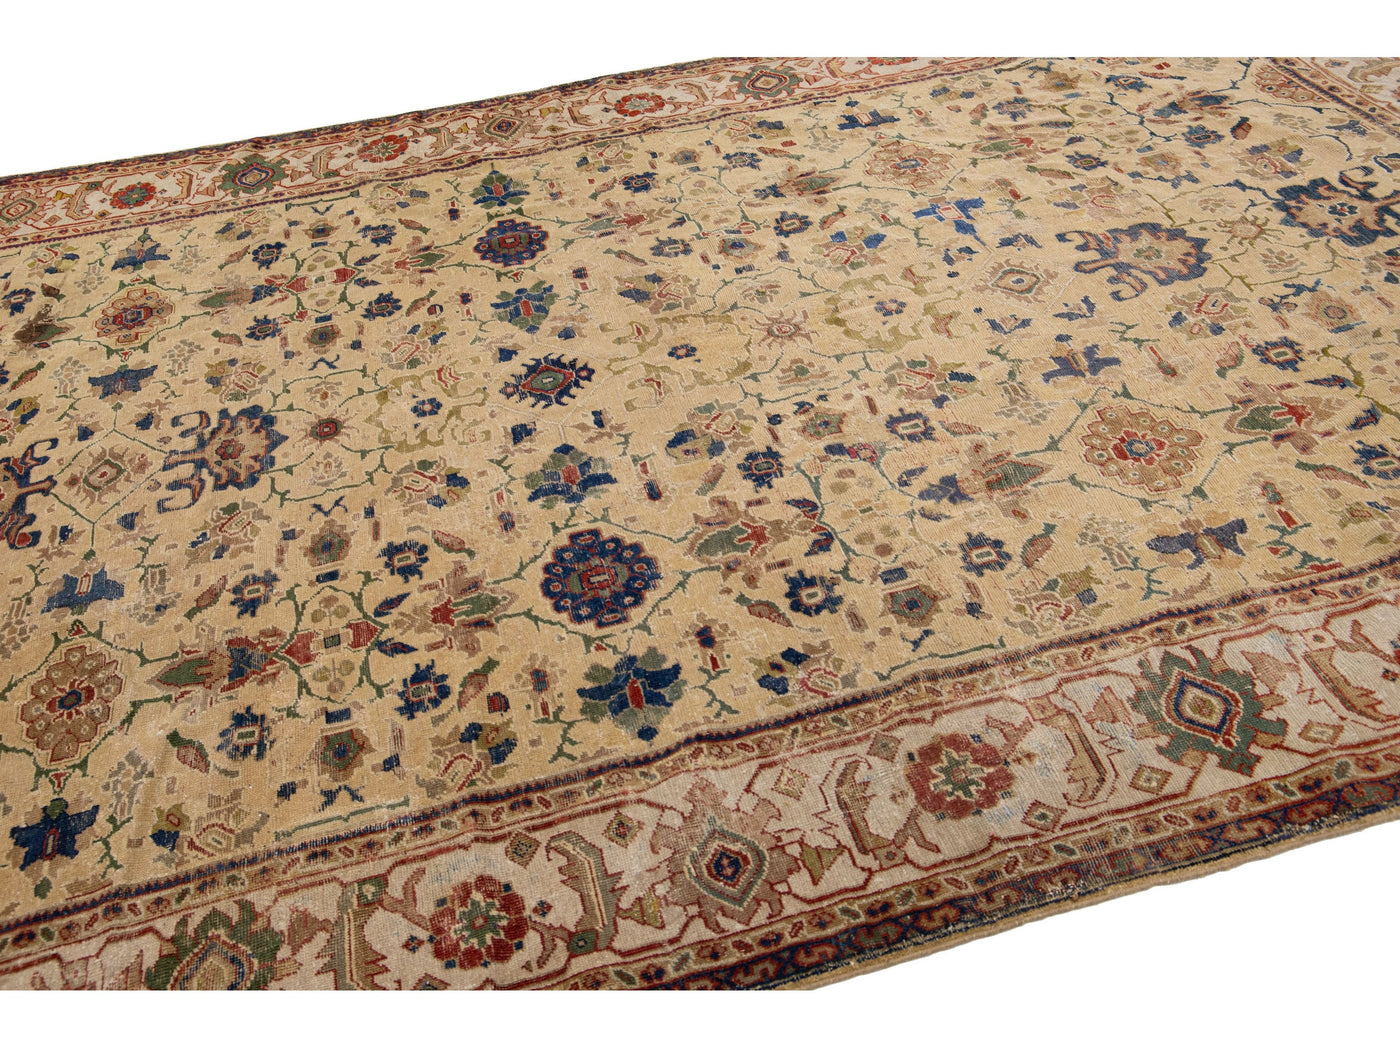 Antique Sultanabad Wool Rug 8 X 12